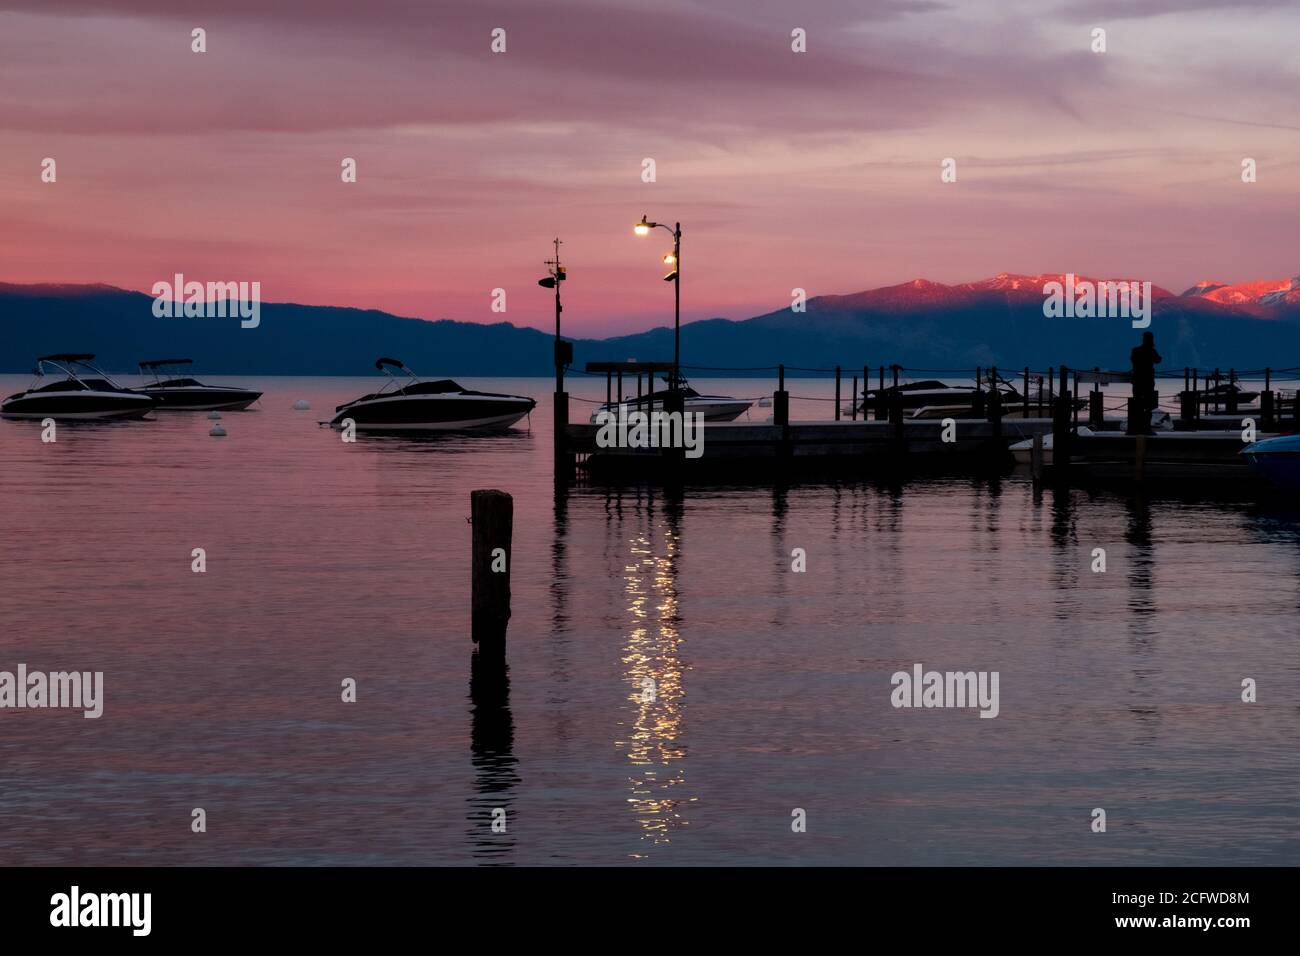 Late sunset at Lake Tahoe, light reflected at top of mountains beyond, boats and people in silhouette Stock Photo